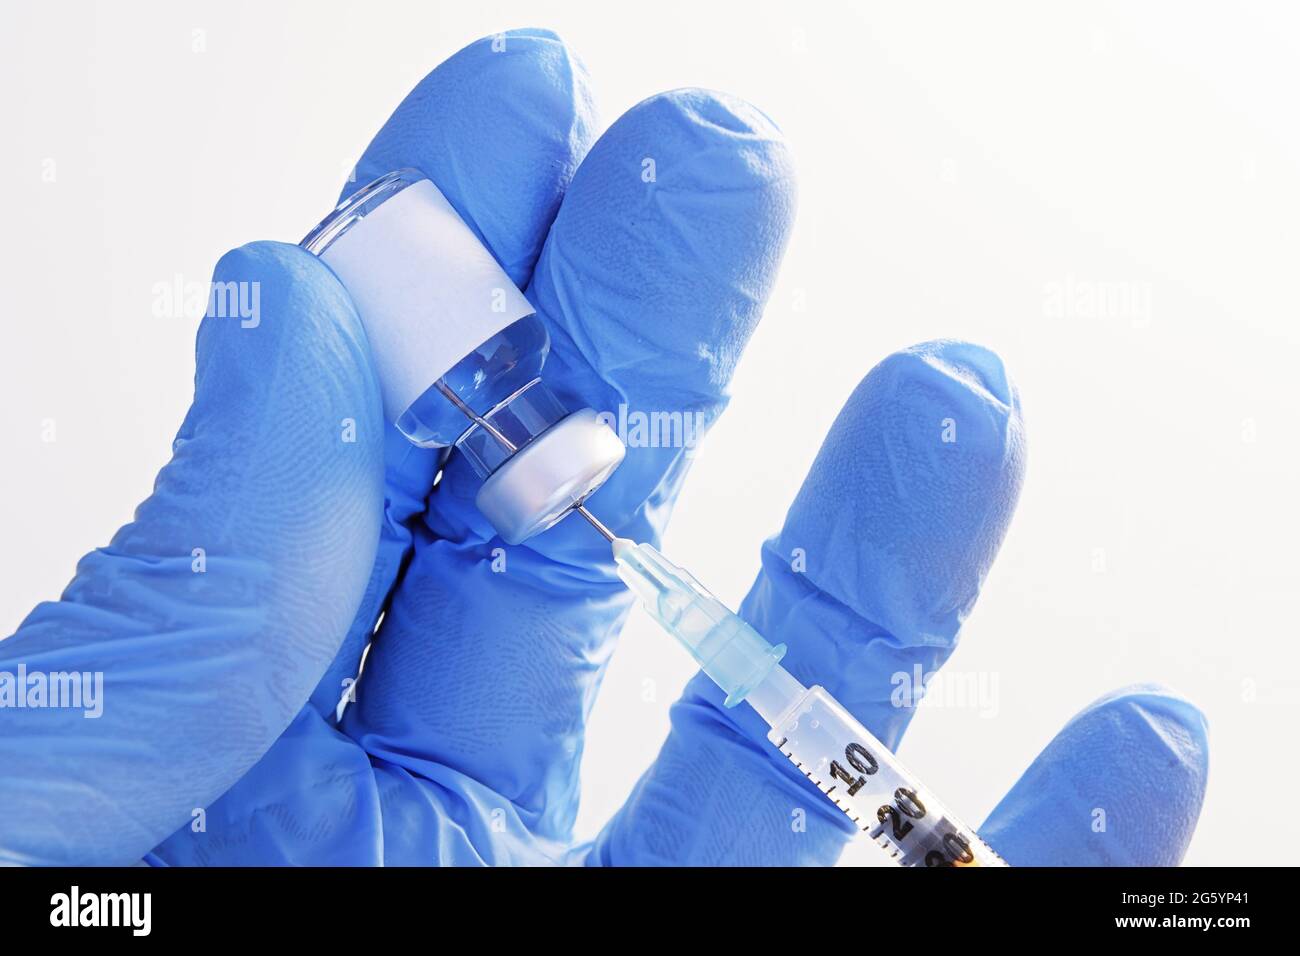 Close-up of hand in gloves holding an unmarked vial and extracting fluid to syringe for injection. Healthcare, medicine, pharmacy and vaccination conc Stock Photo